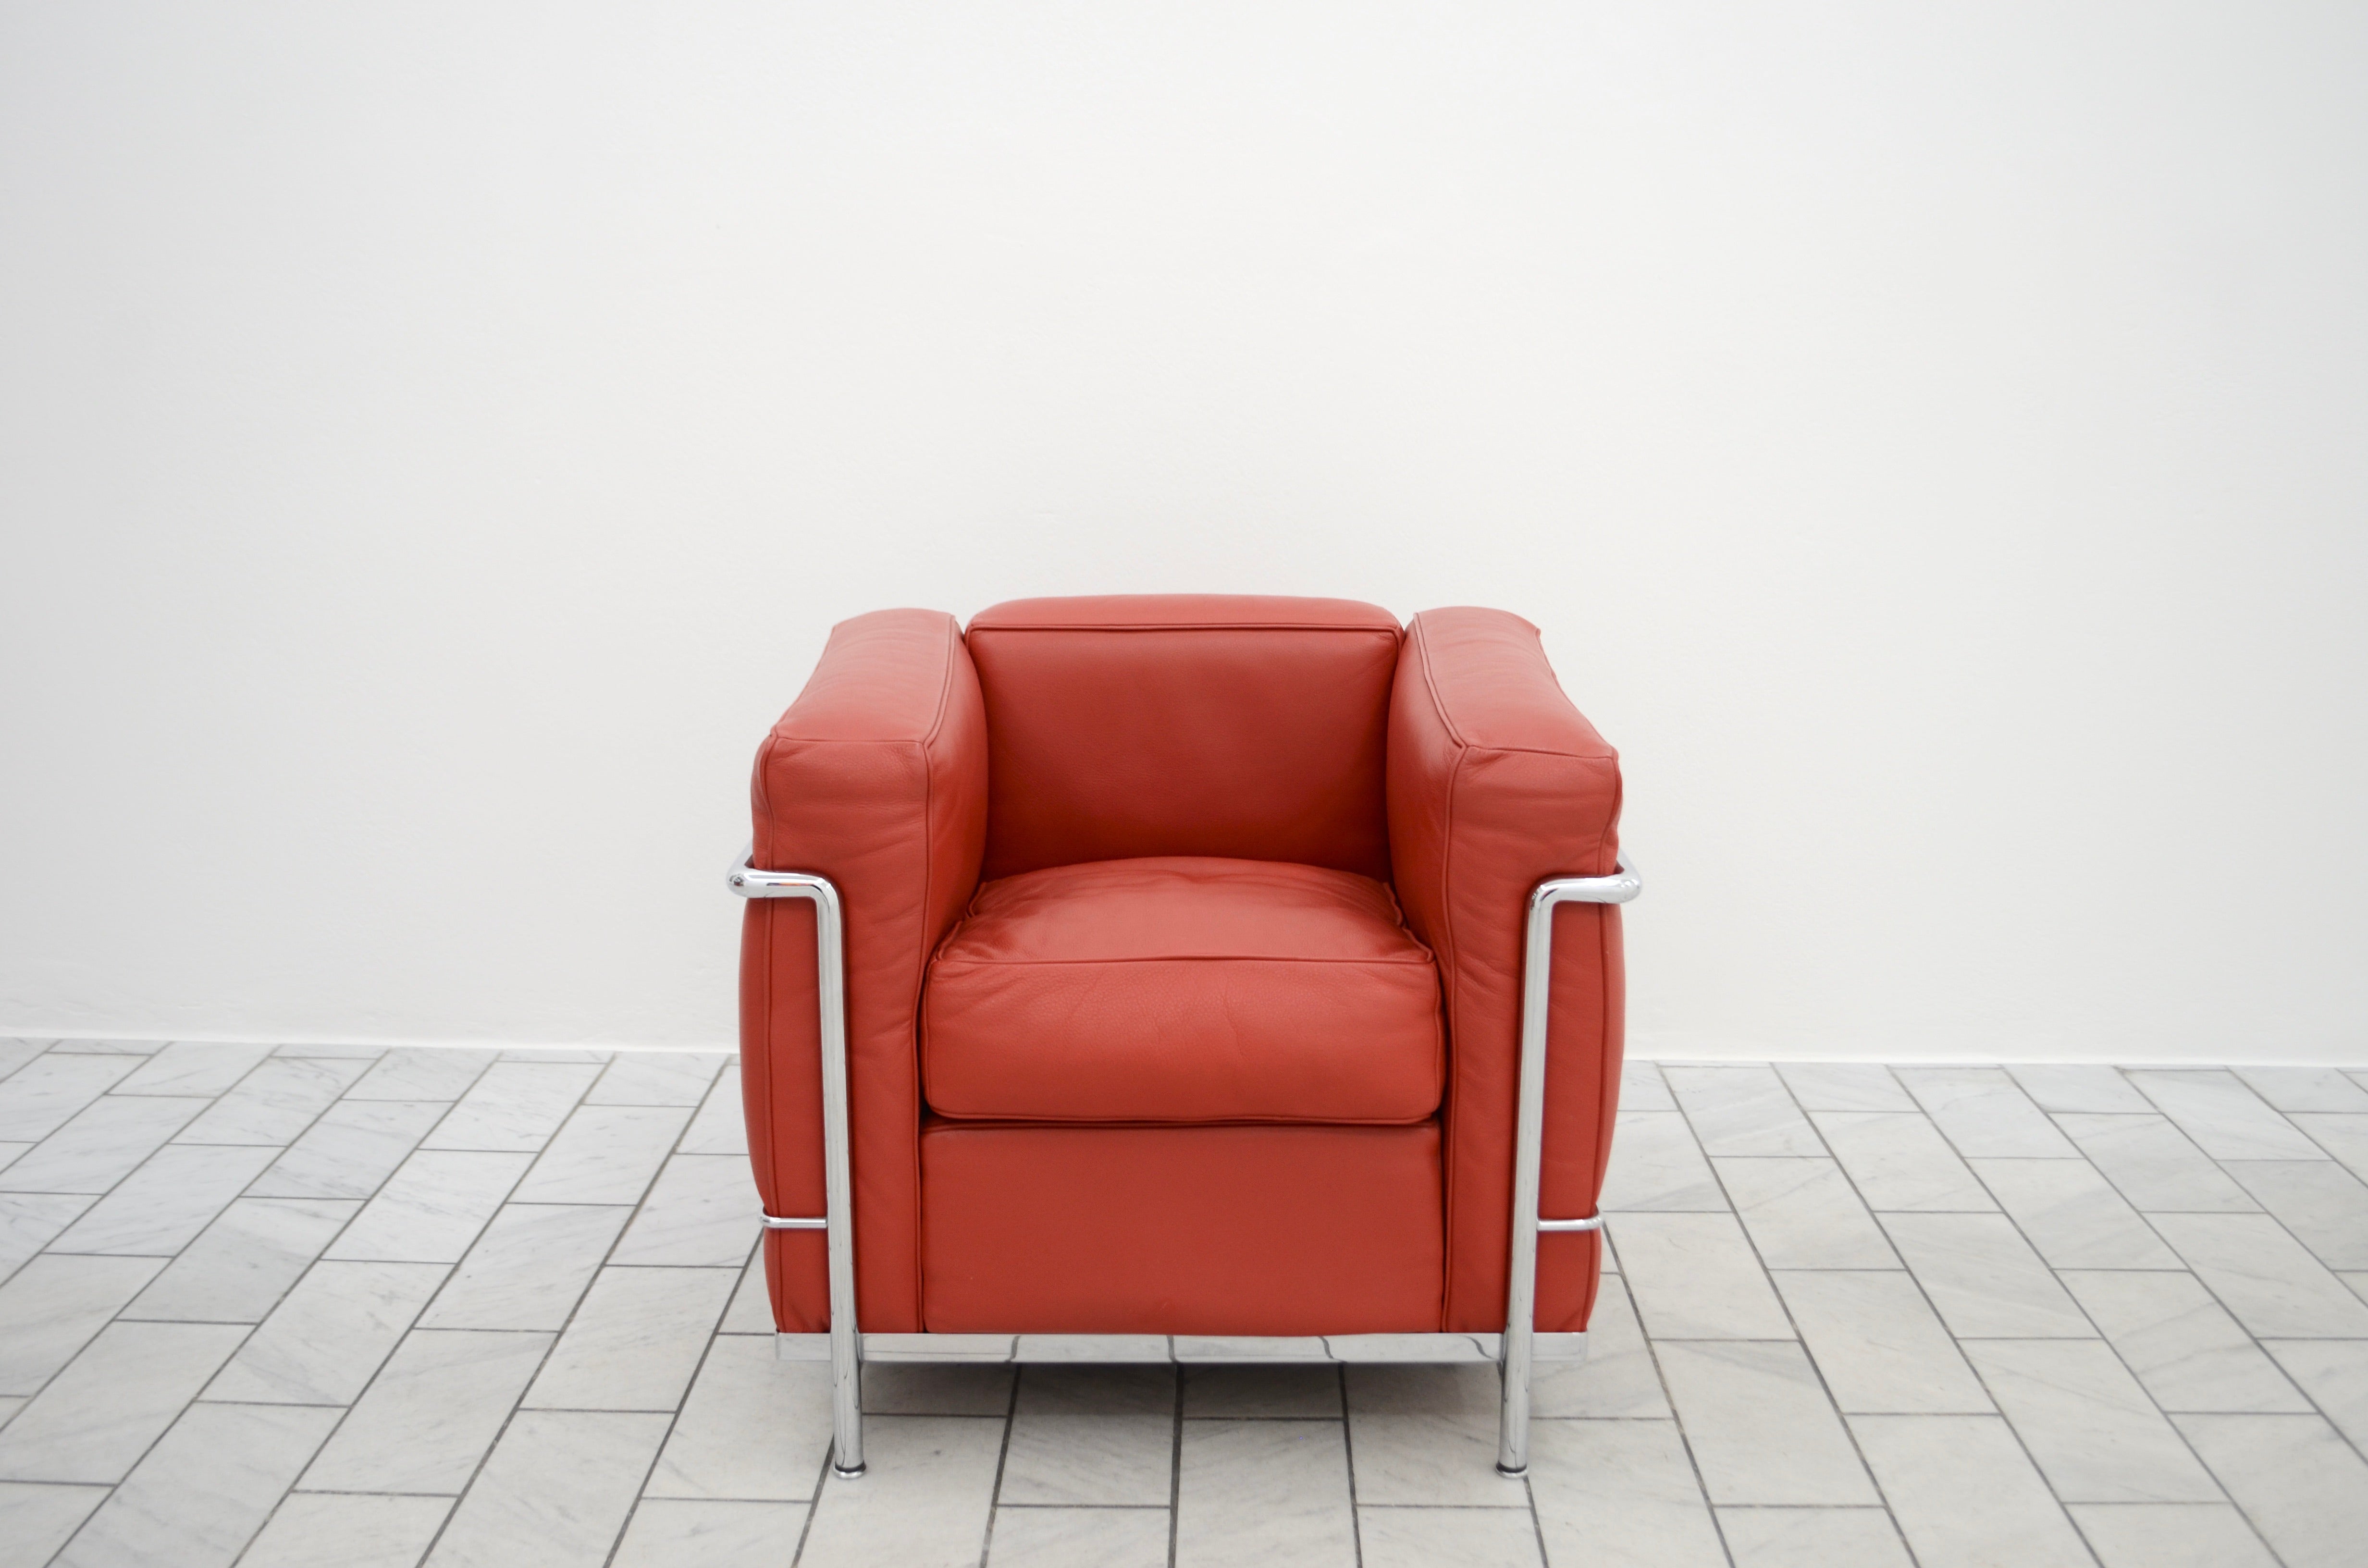 This LC2 armchair in red  carmin leather was designed by Le Corbusier and produced by Cassina. 
It features a chromed steel frame. 
Classic Modern Bauhaus object in good condition.
LCX Scozia
Carminio
Z Leather qulity
13X290
